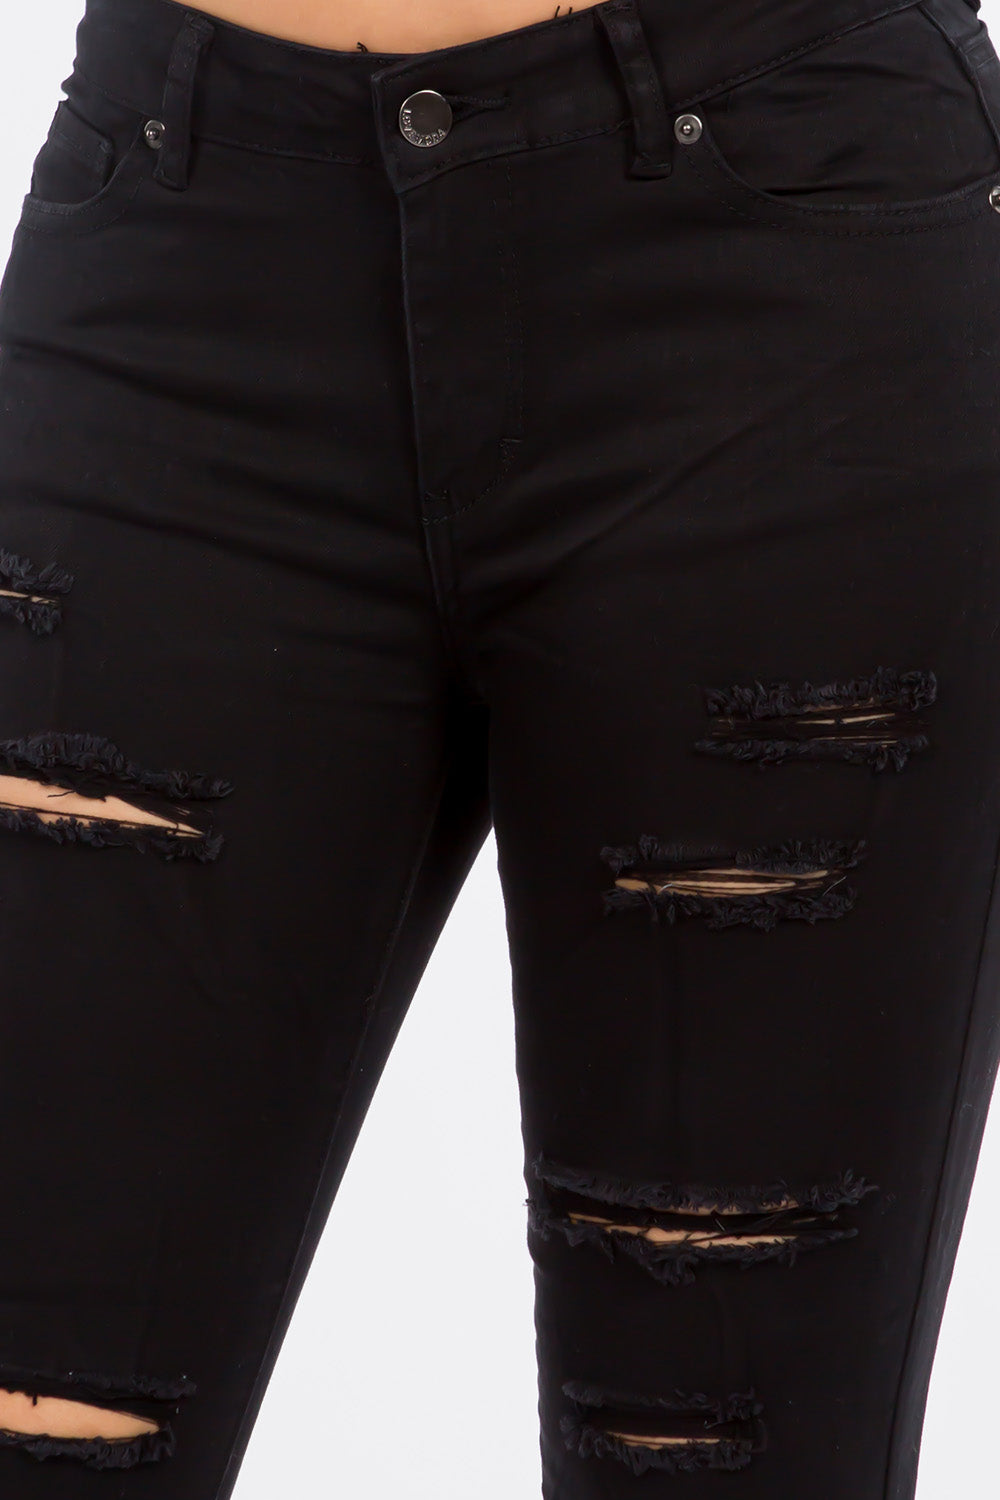 Low Rise Distressed Skinny Jeans